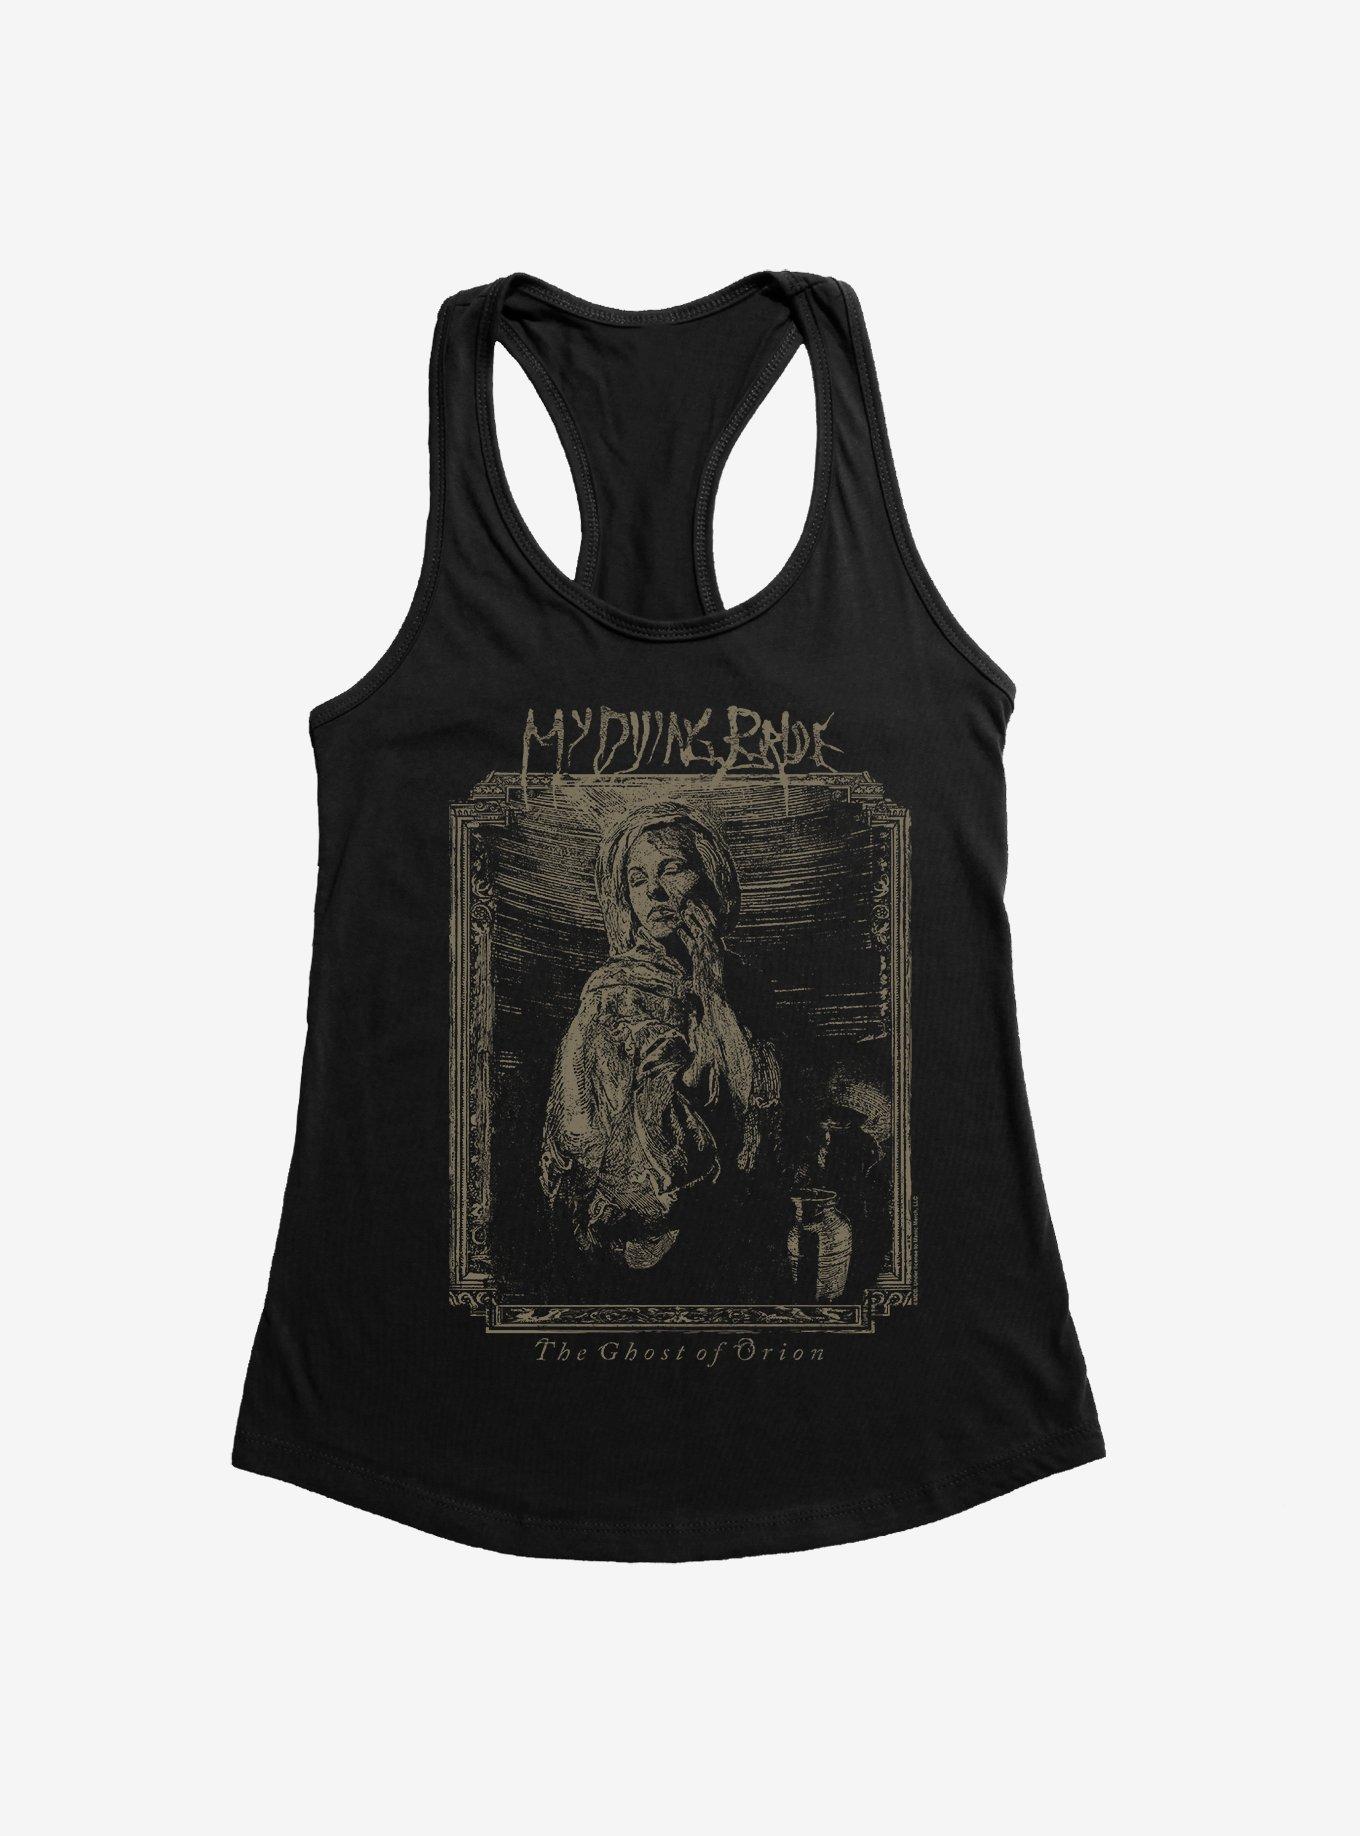 My Dying Bride The Ghost Of Orion Girls Tank, BLACK, hi-res